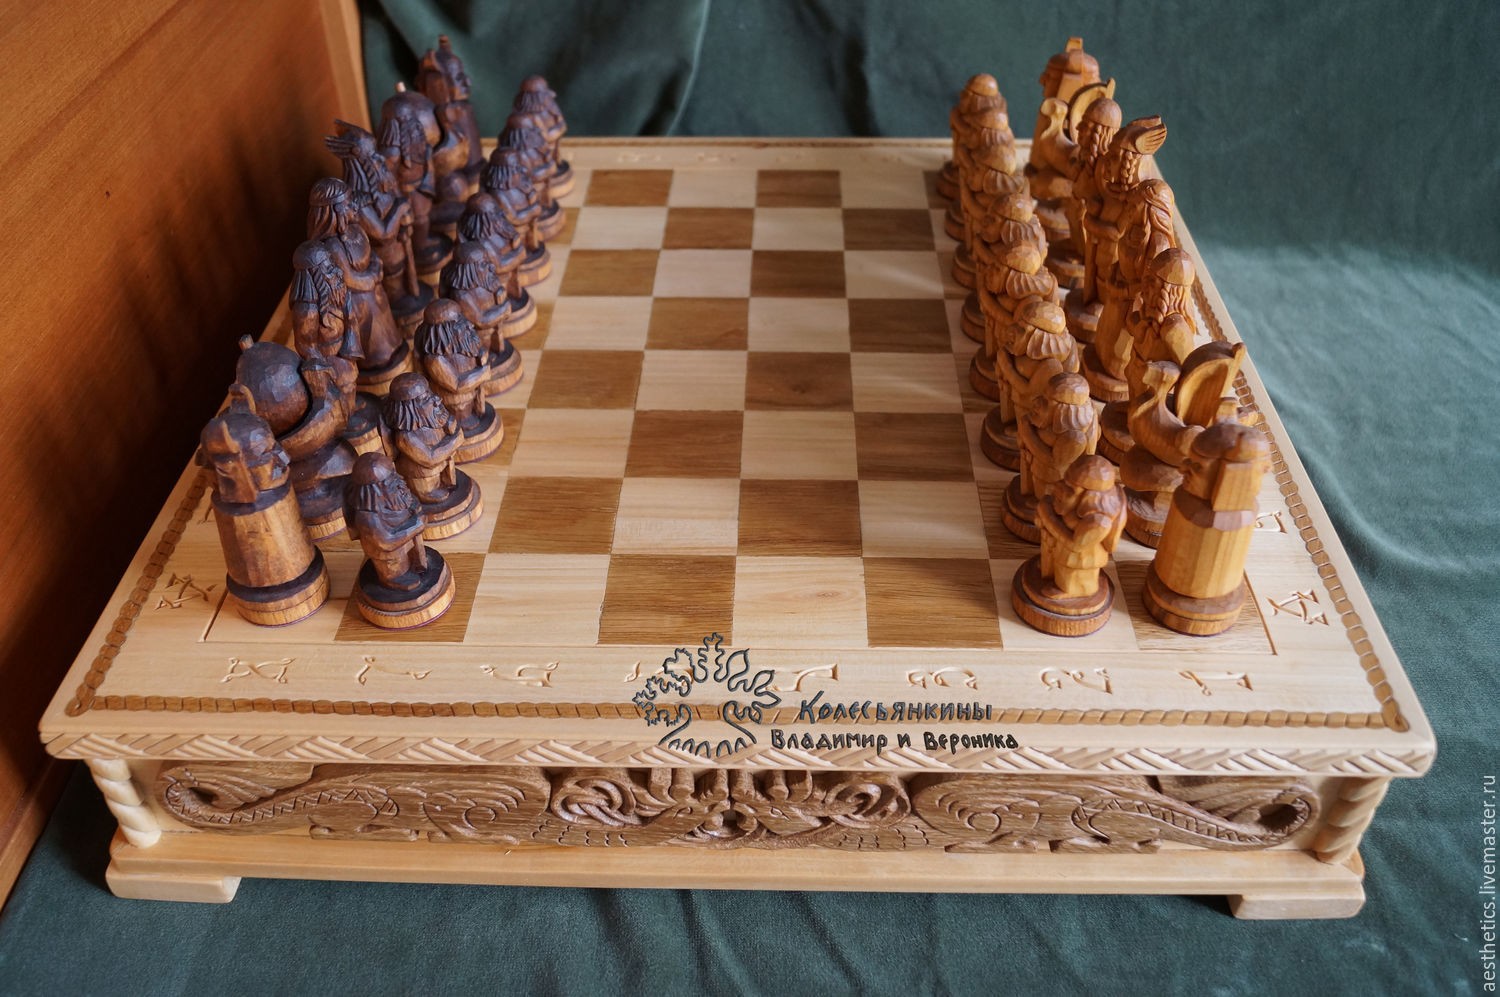 Chess Papercraft Chess and Table Vikings – Shop Online On Livemaster with Shipping